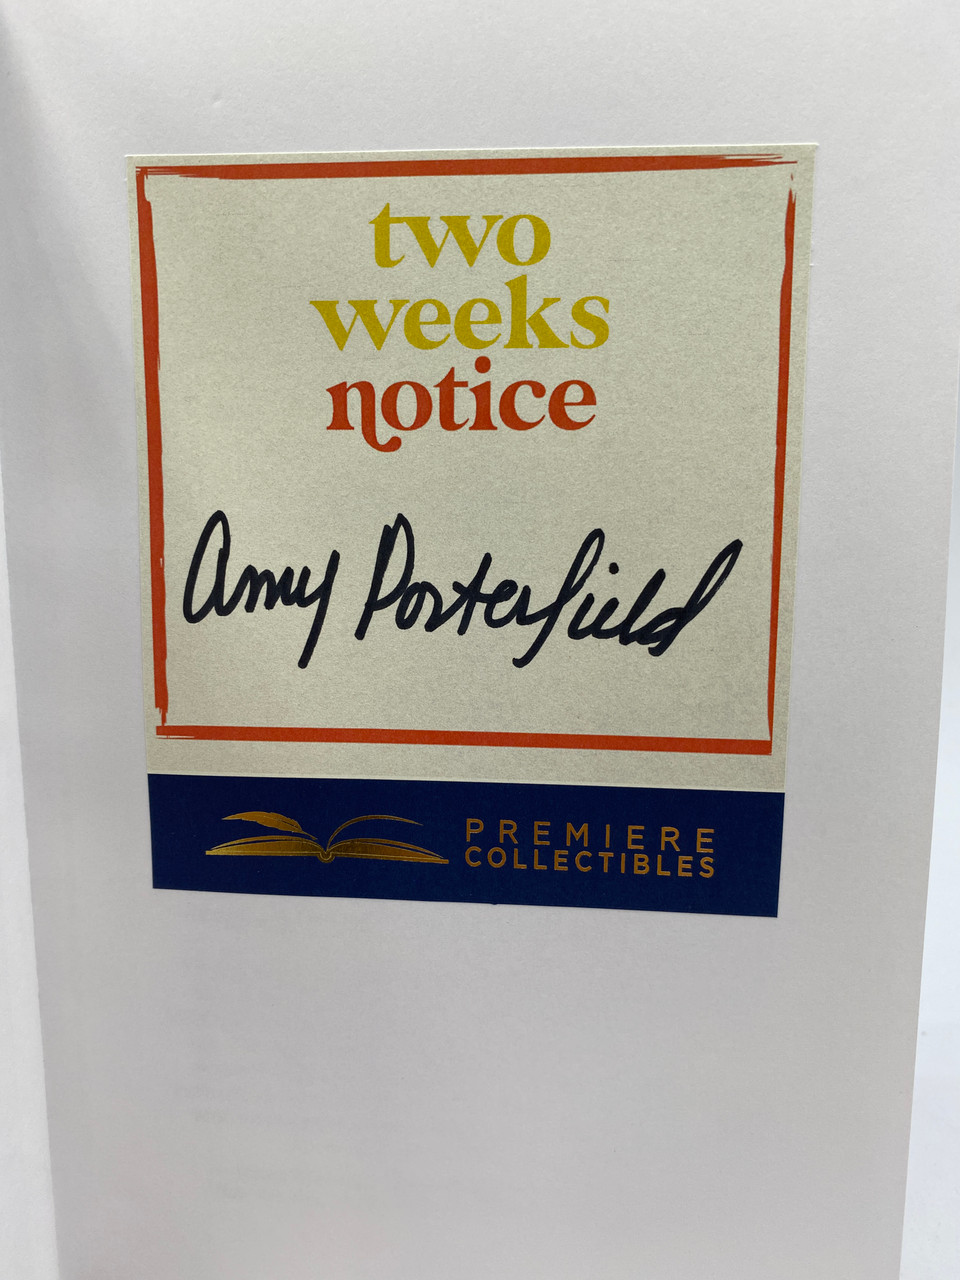 Two Weeks Notice by Amy Porterfield: 9781401969875